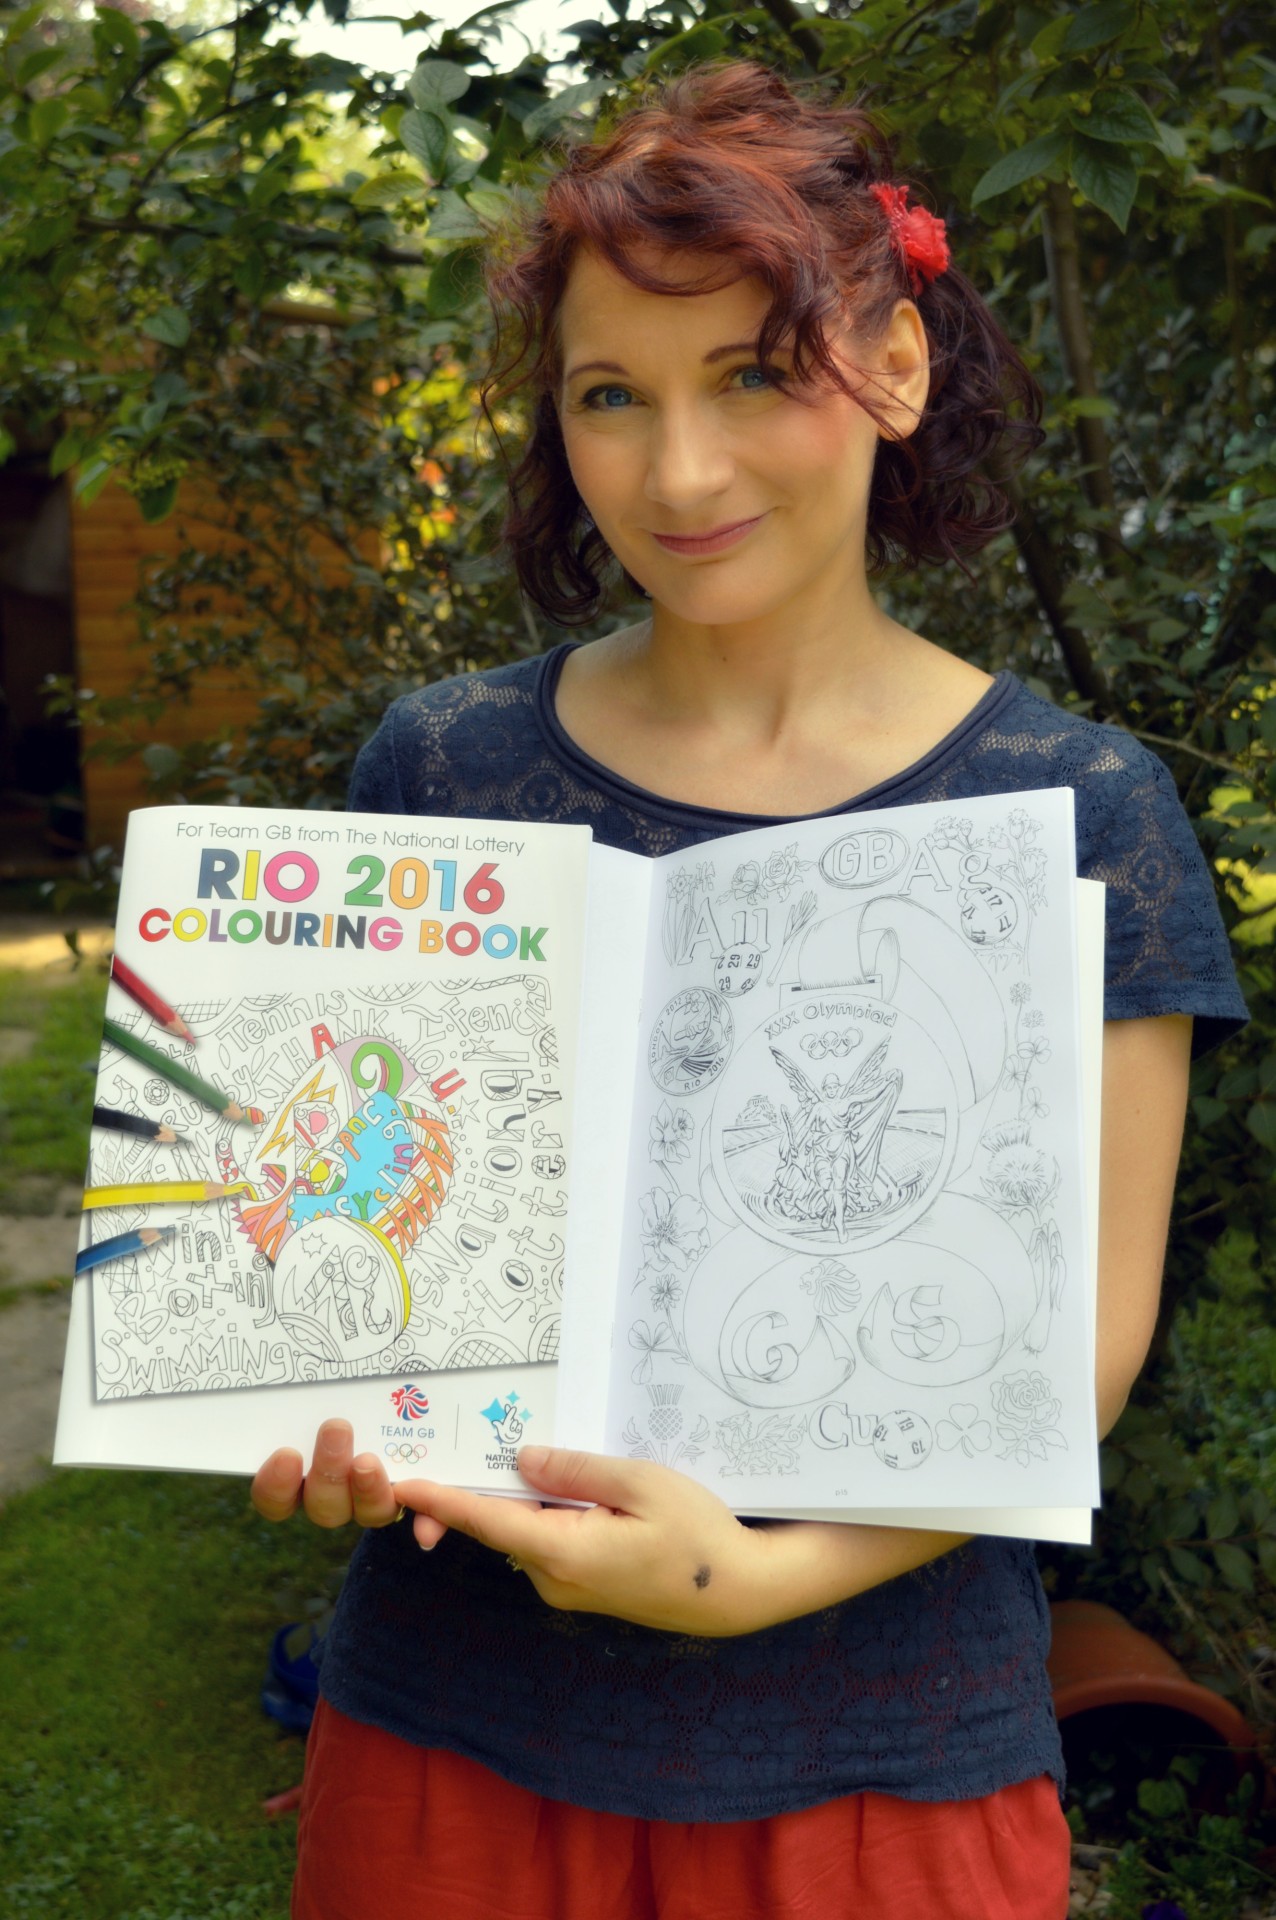 <p>Selling off my copies of the Team GB olympic colouring book, not available to the public, to raise funds for the incurable cancer myeloma. Please visit my website for further info <a href="http://www.kirstyoleary.com">www.kirstyoleary.com</a></p>